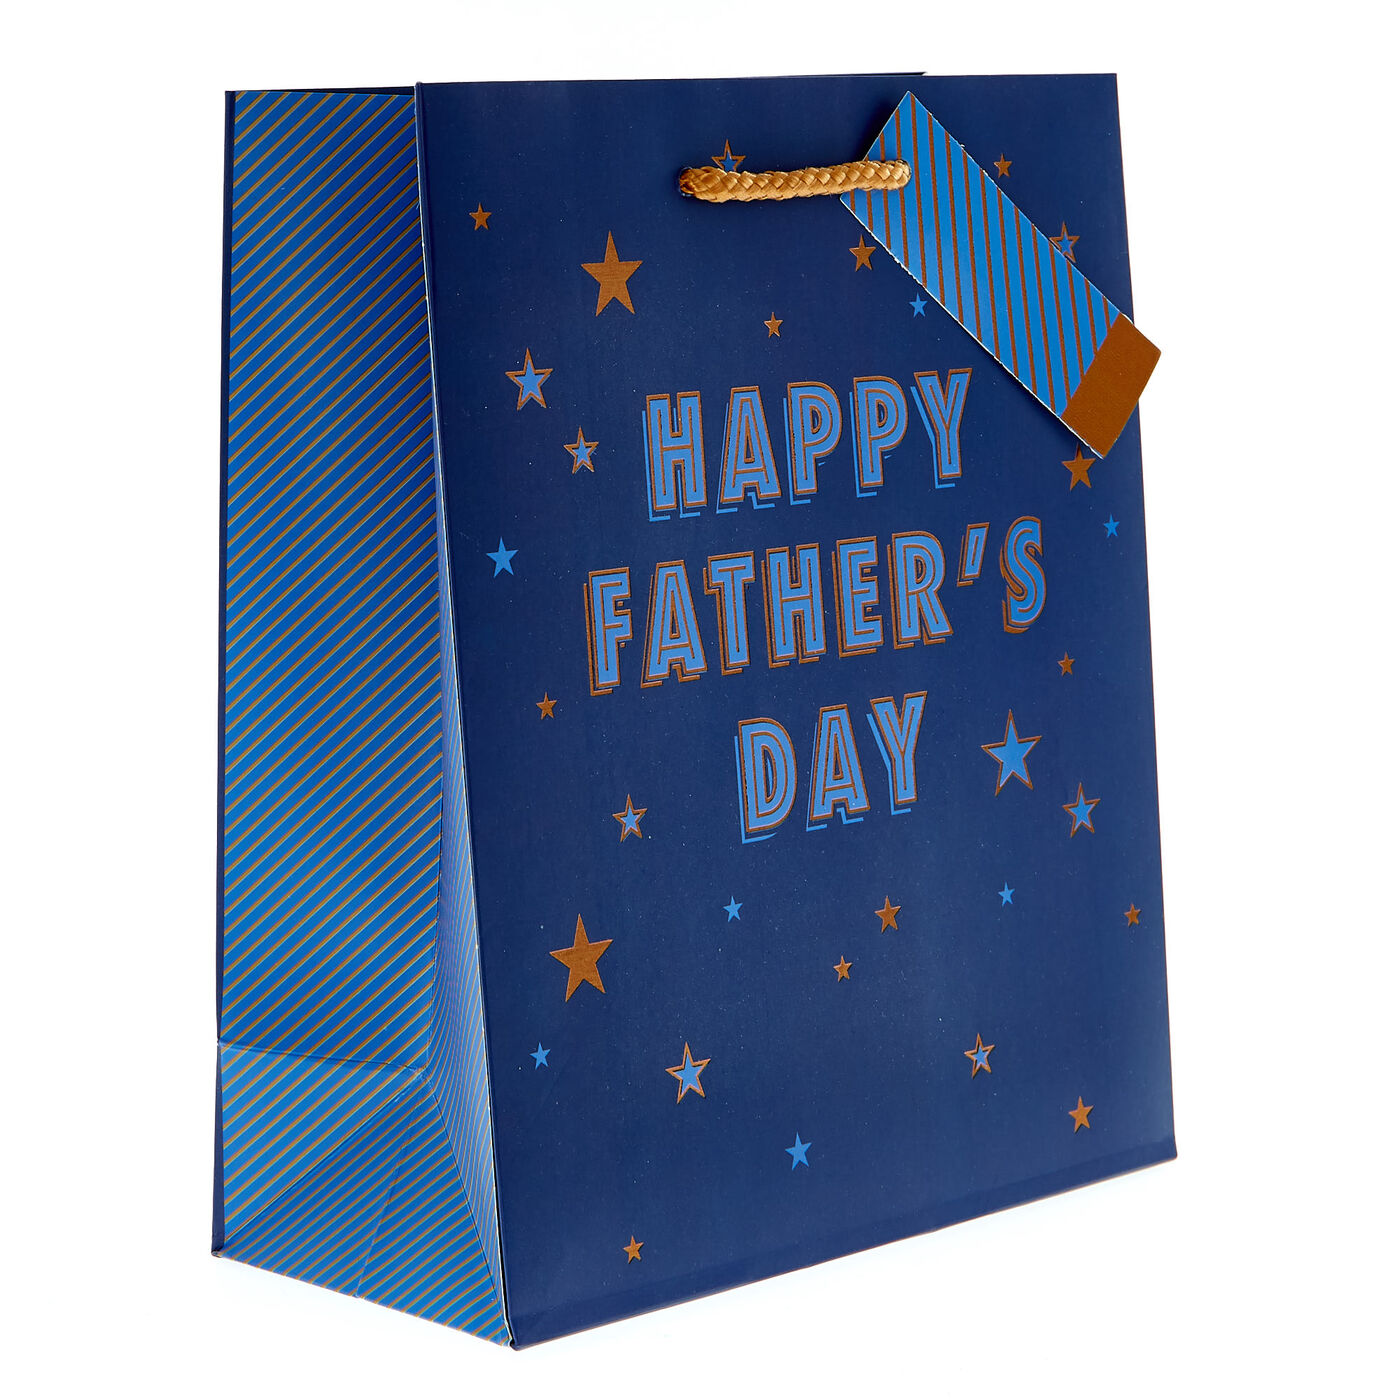 Buy Medium Portrait Gift Bag Happy Father's Day for GBP 0.49 Card